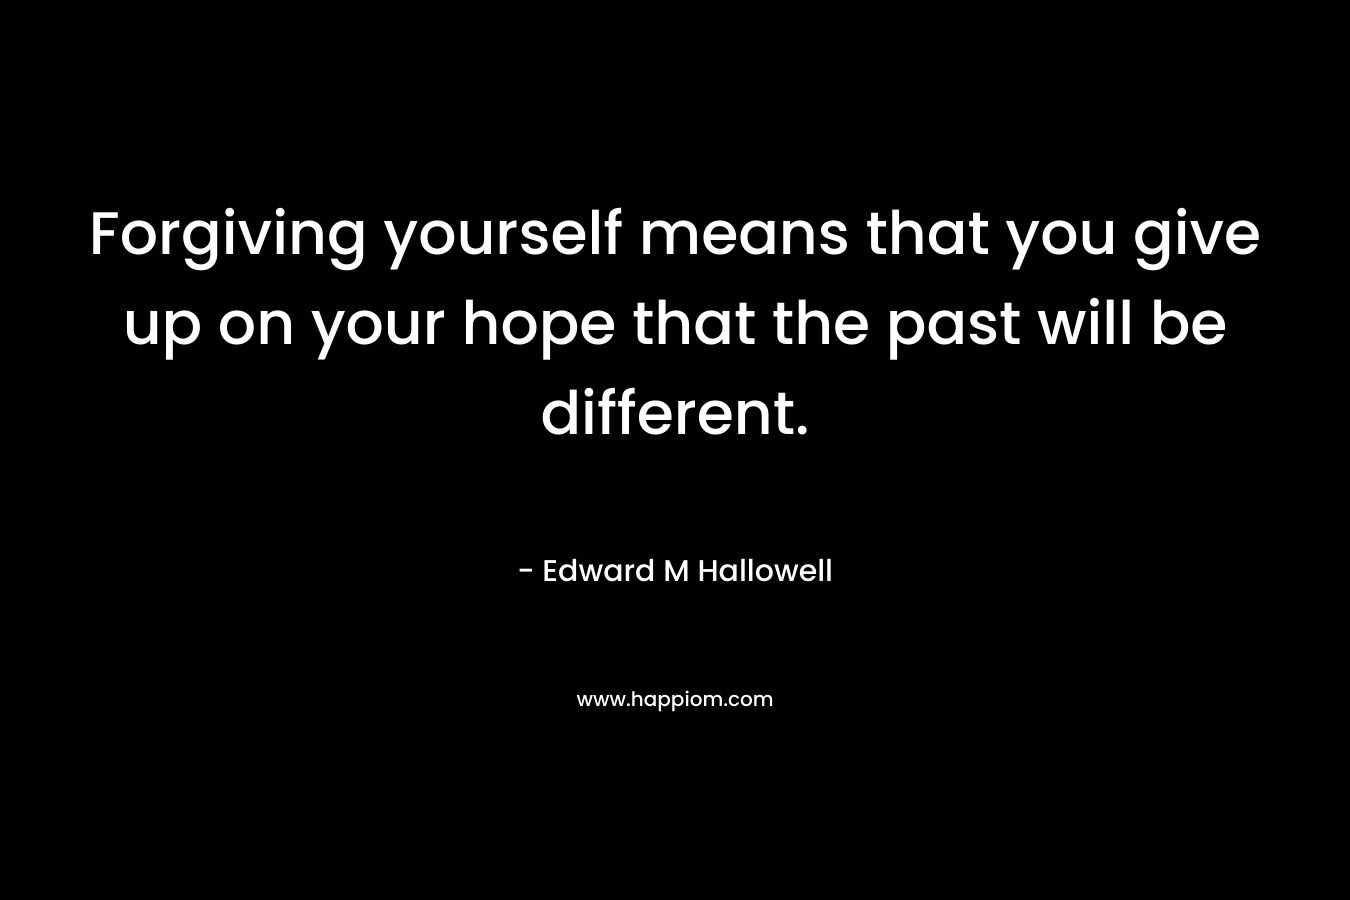 Forgiving yourself means that you give up on your hope that the past will be different. – Edward M Hallowell